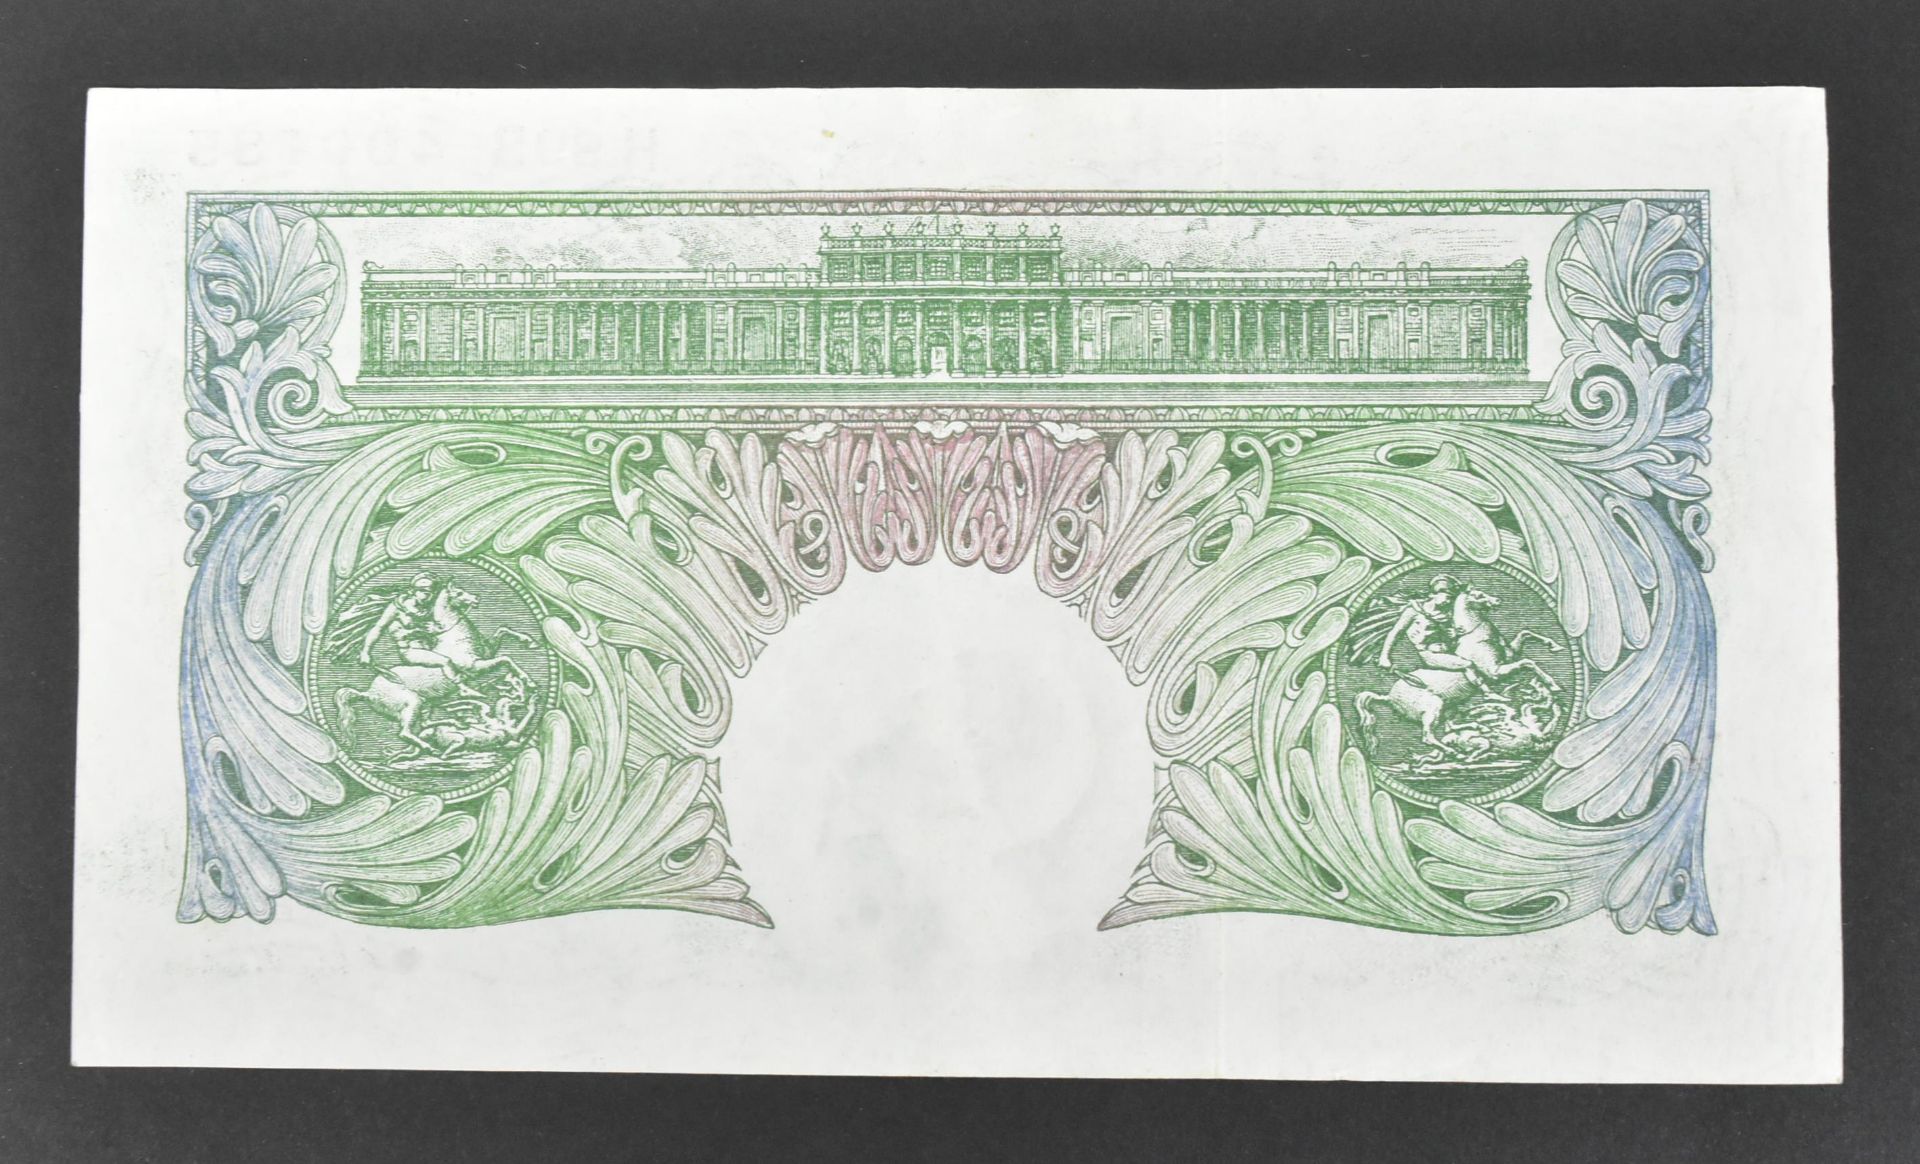 COLLECTION BRITISH UNCIRCULATED BANK NOTES - Image 51 of 61